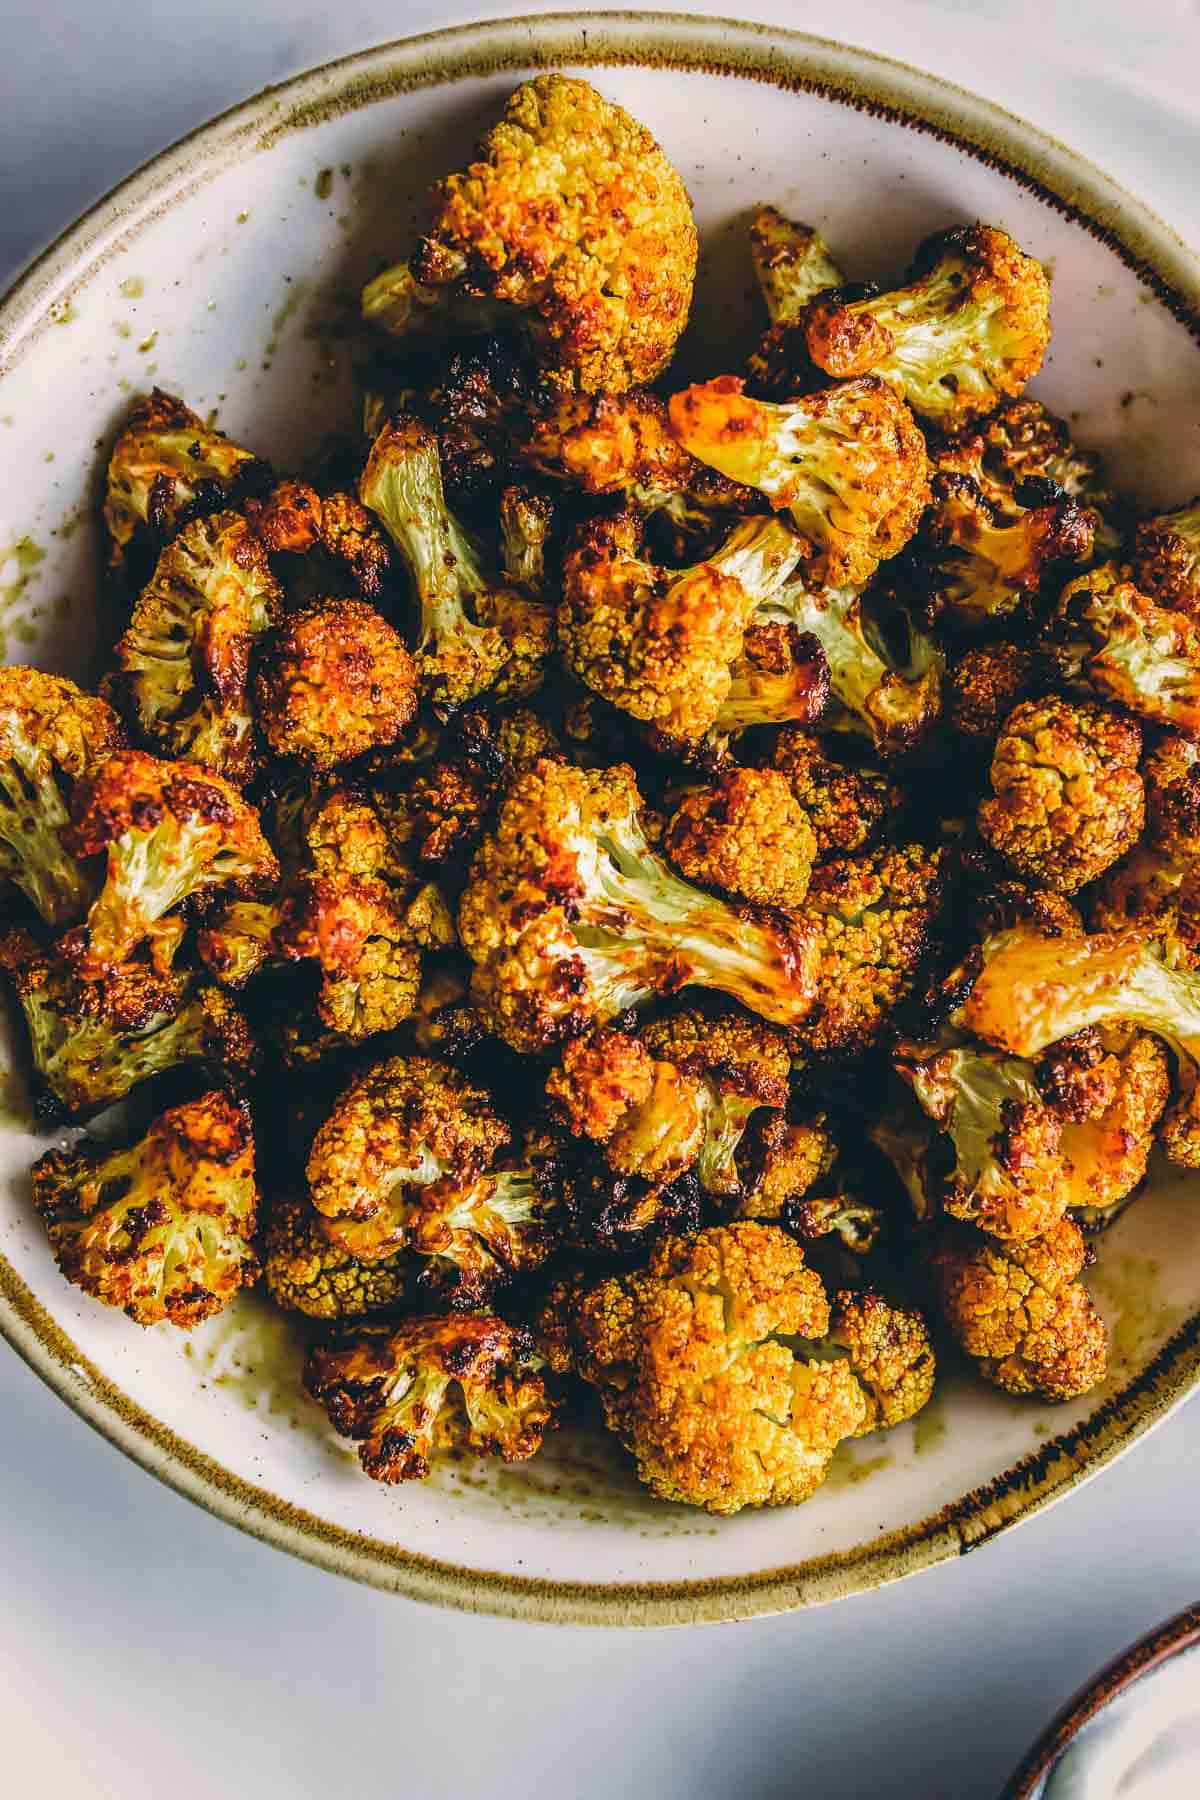 Roasted cauliflower in a bowl on a table.